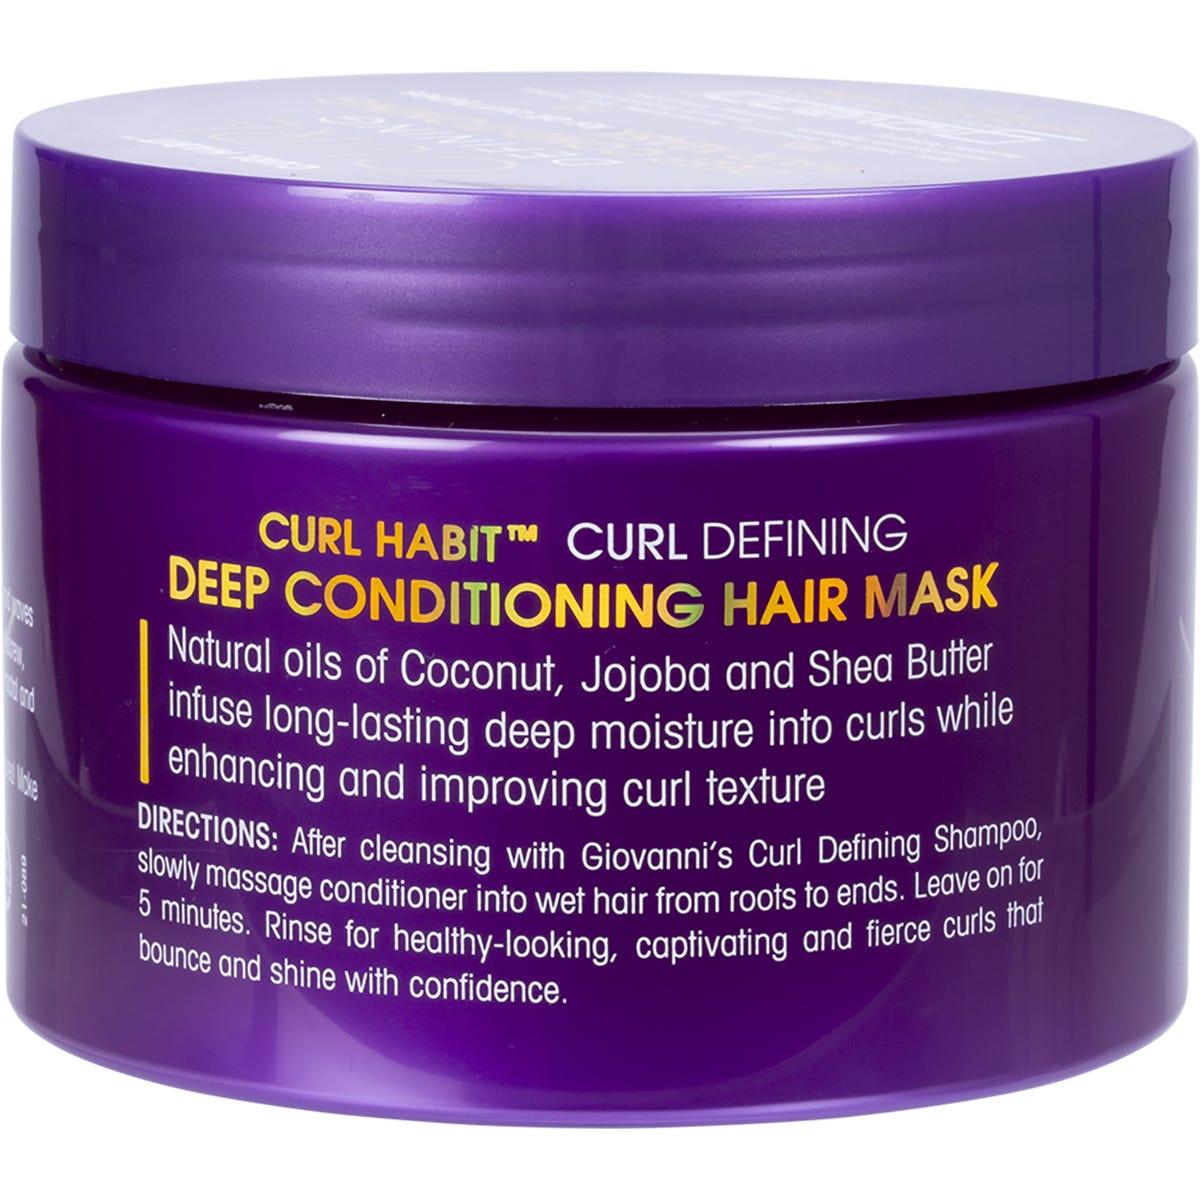 Giovanni Deep Conditioning Hair Mask Curl Habit Curl Defining